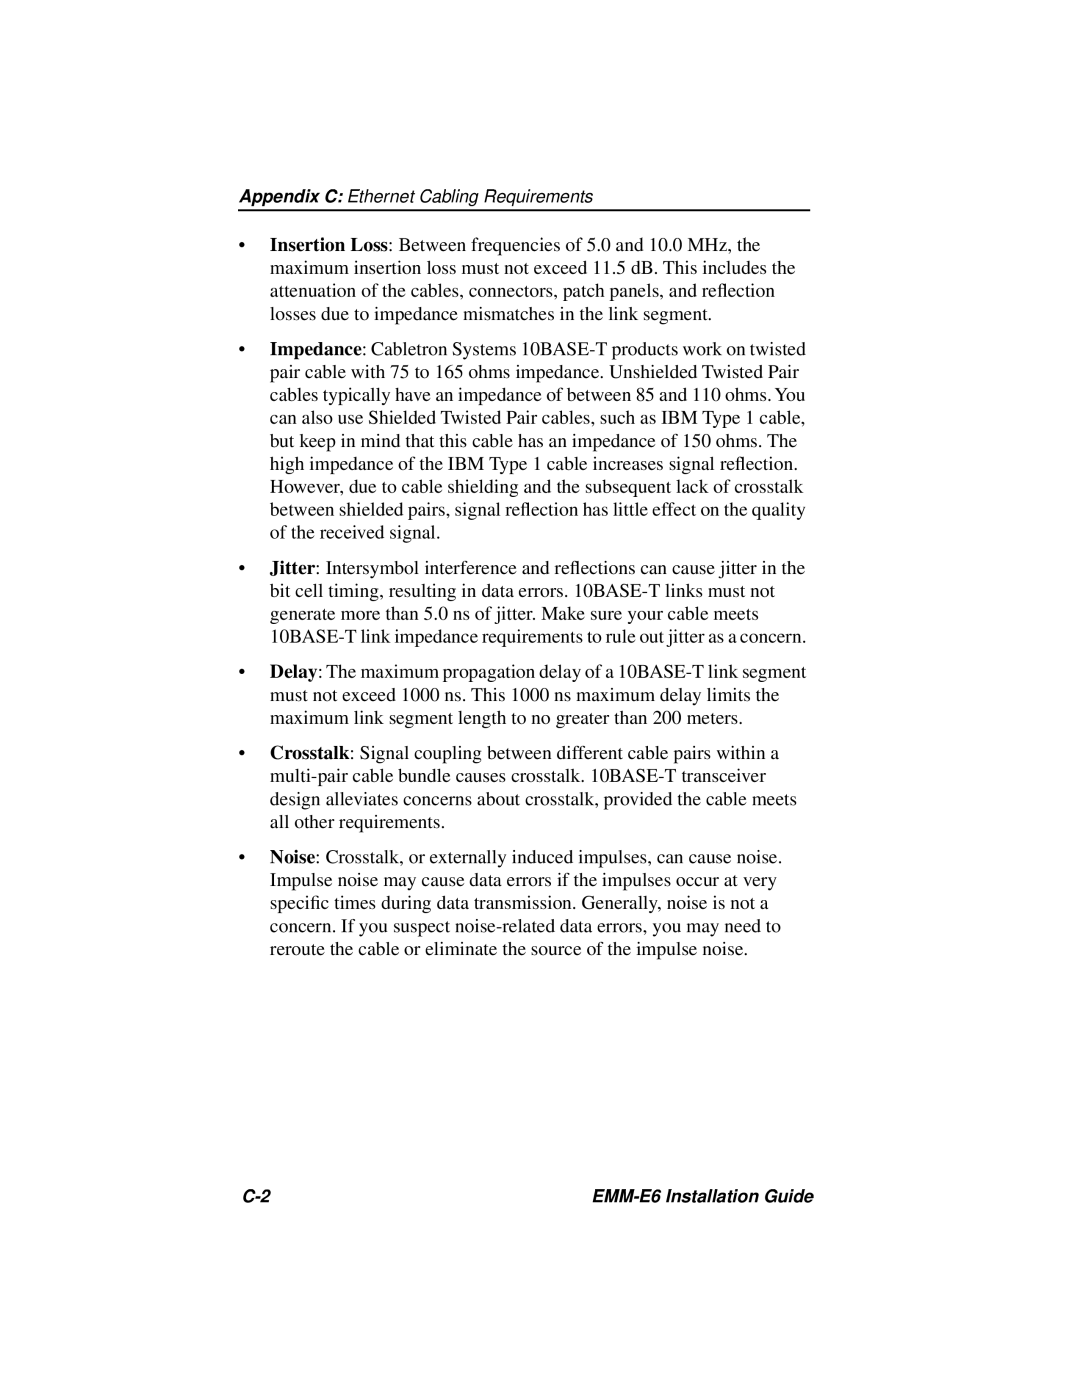 Cabletron Systems EMM-E6 manual Appendix C Ethernet Cabling Requirements 